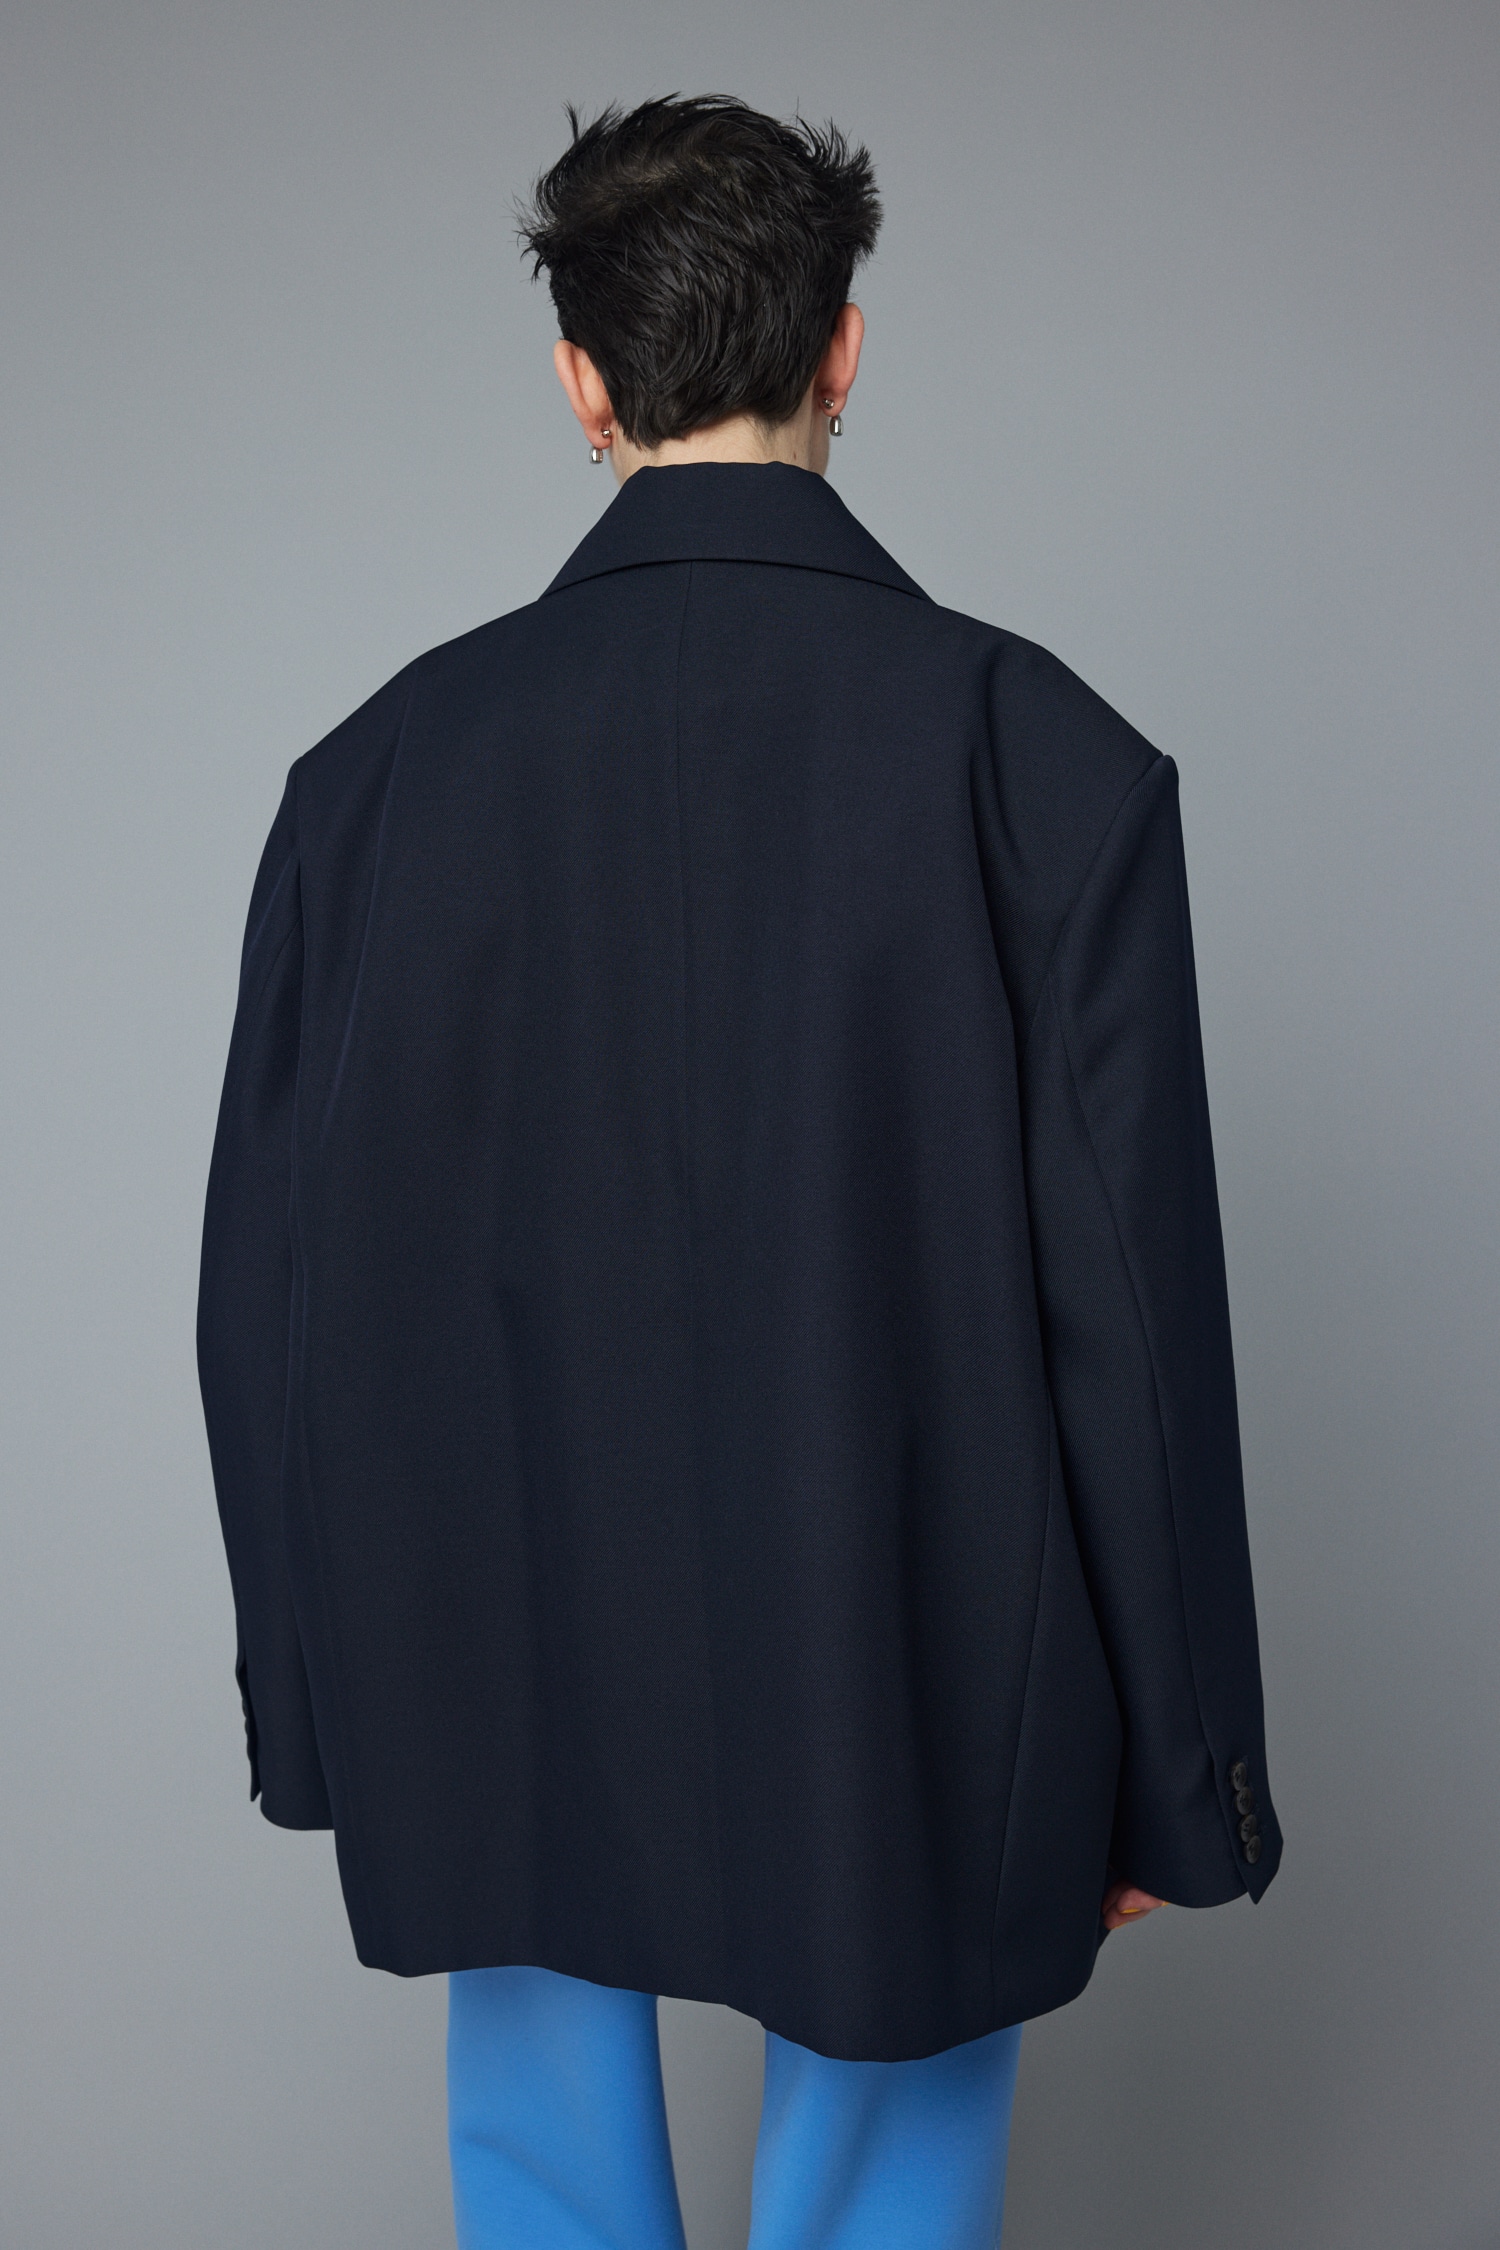 Over silhouette jacket